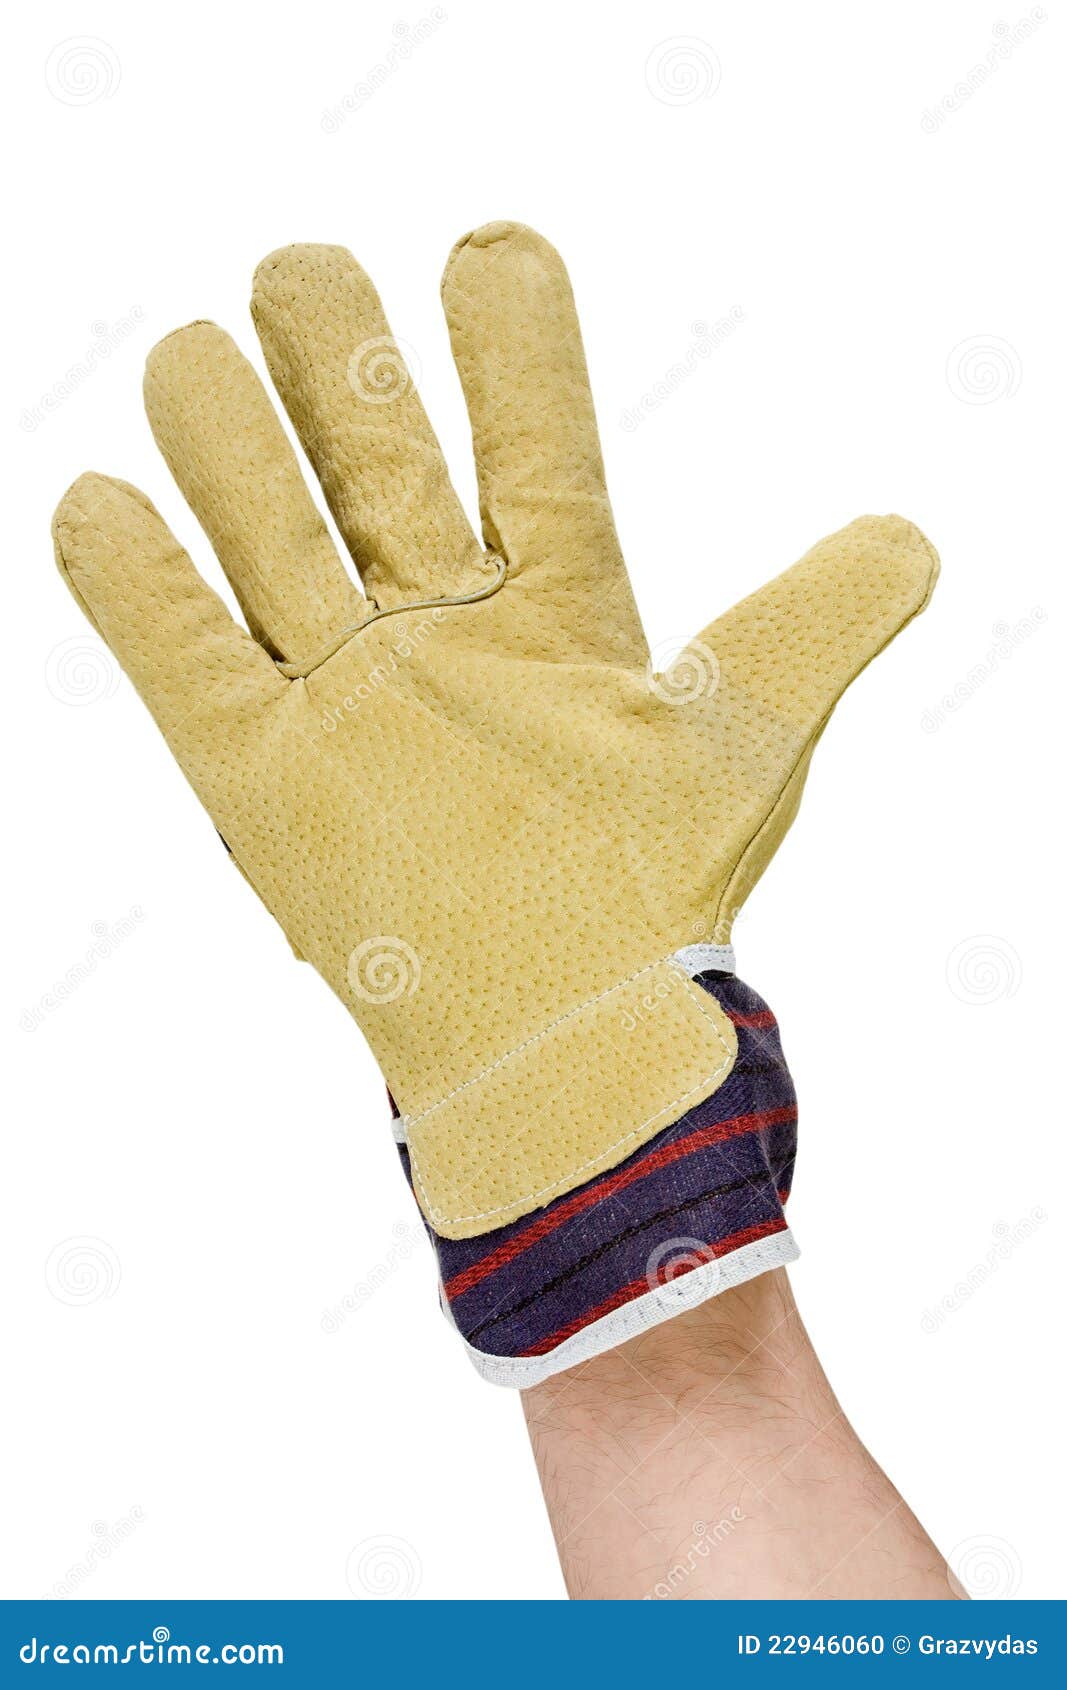 Hand with work glove isolated on a white background